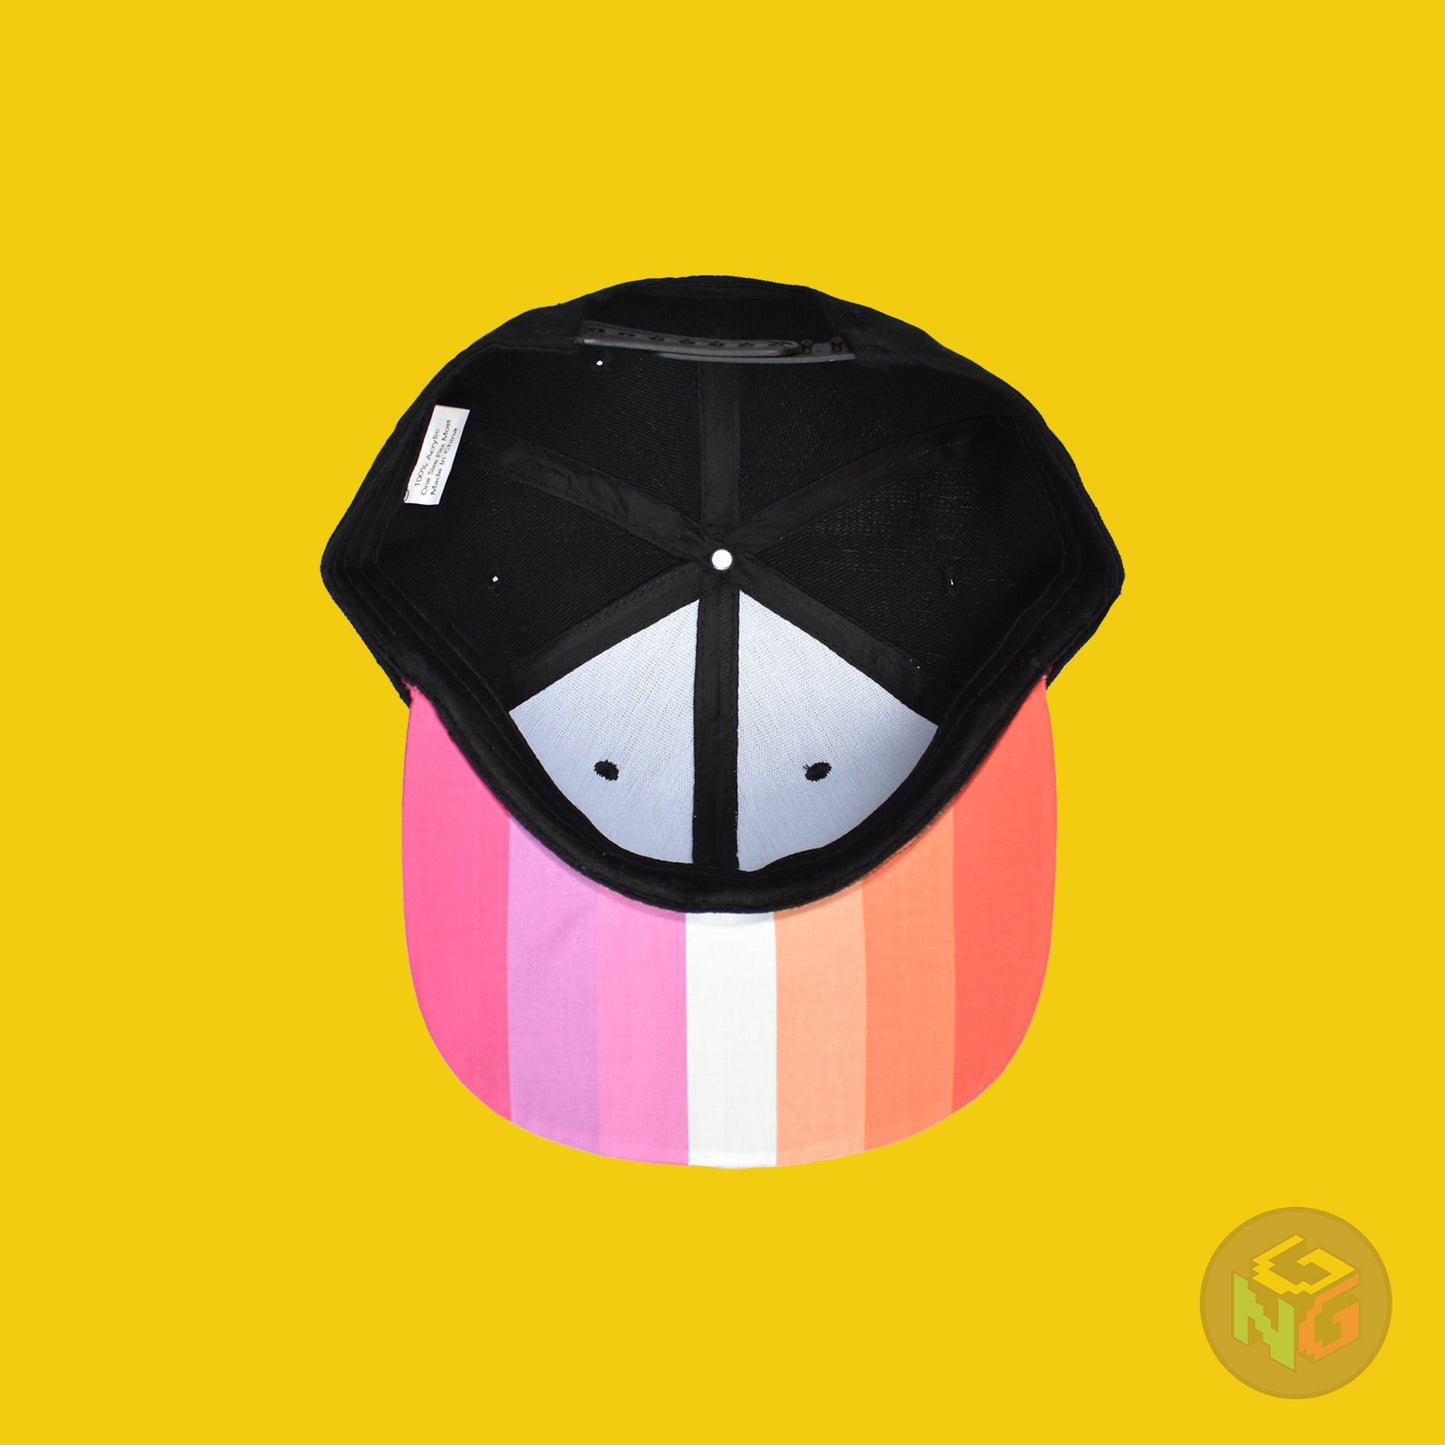 Black flat bill snapback hat. The brim has the lesbian pride flag on both sides and the front of the hat has the word “LESBIAN” in orange, pink, and white letters. Underside view